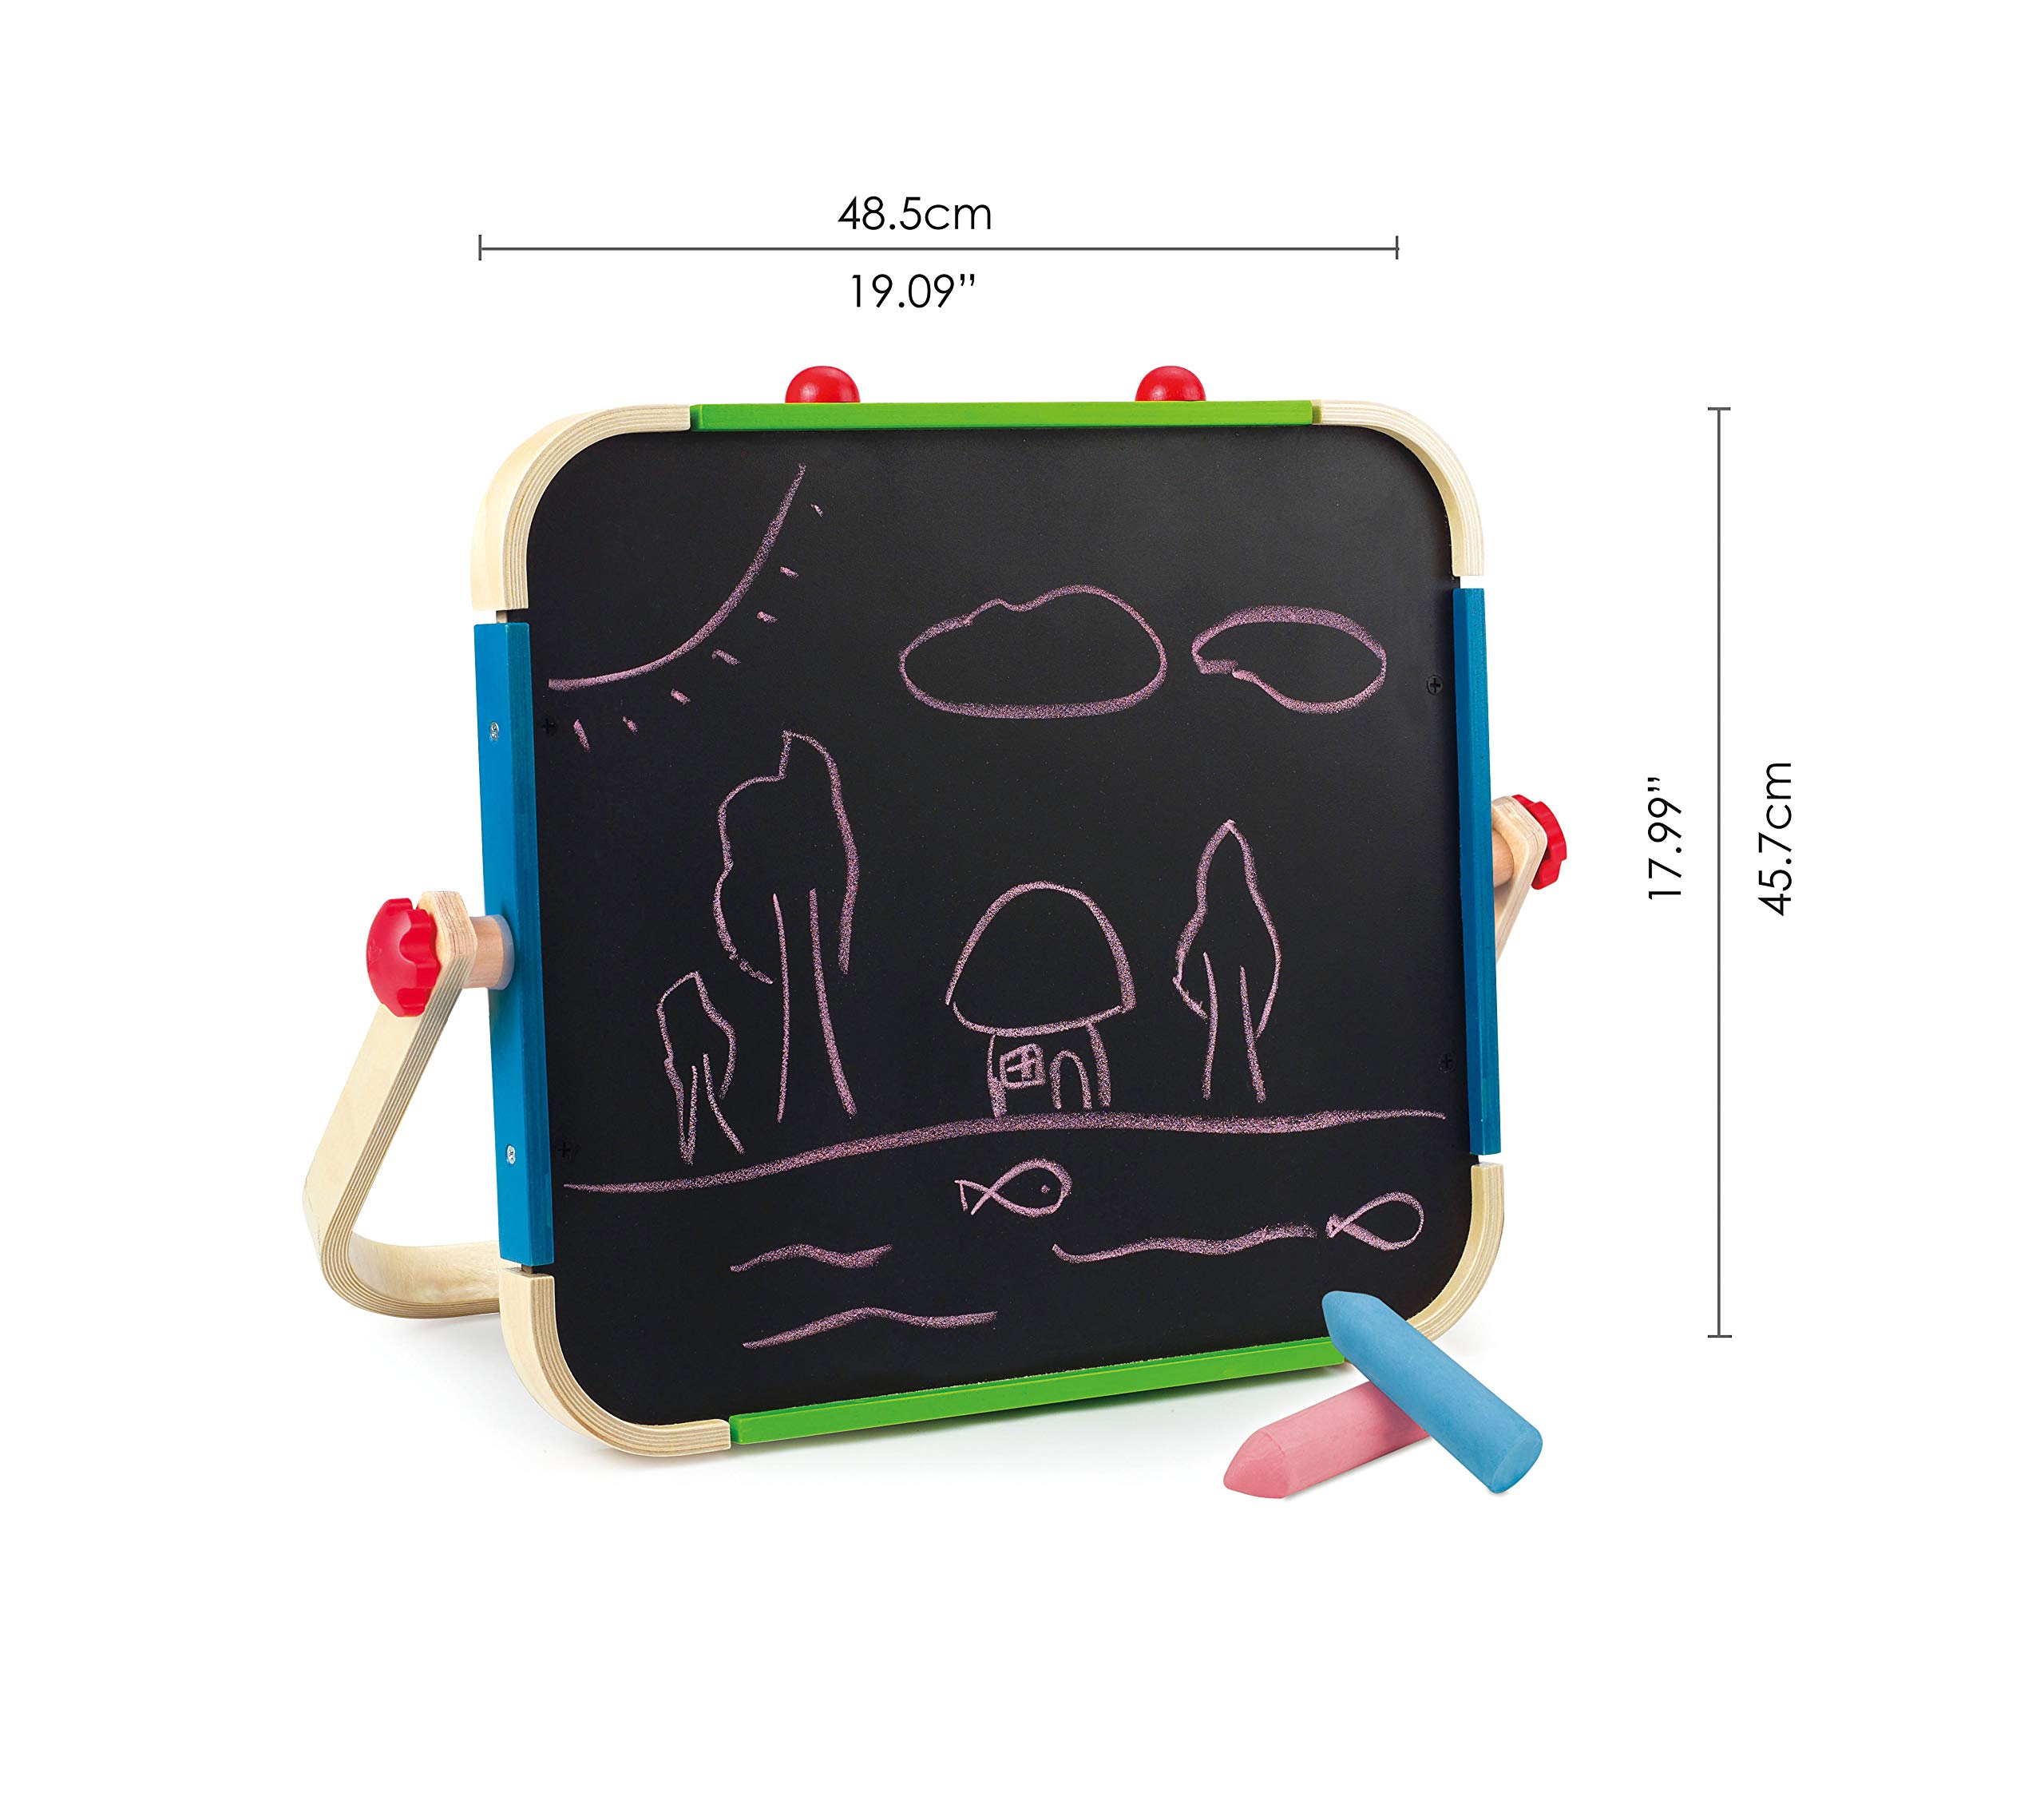 Early Explorer Anywhere Table Top Art Studio by Hape | Award Winning Double-Sided Wooden Kids Easel Whiteboard/Chalkboard with 2 Chalk Pieces, Eraser and Magnetic Wood Clamp for Paper